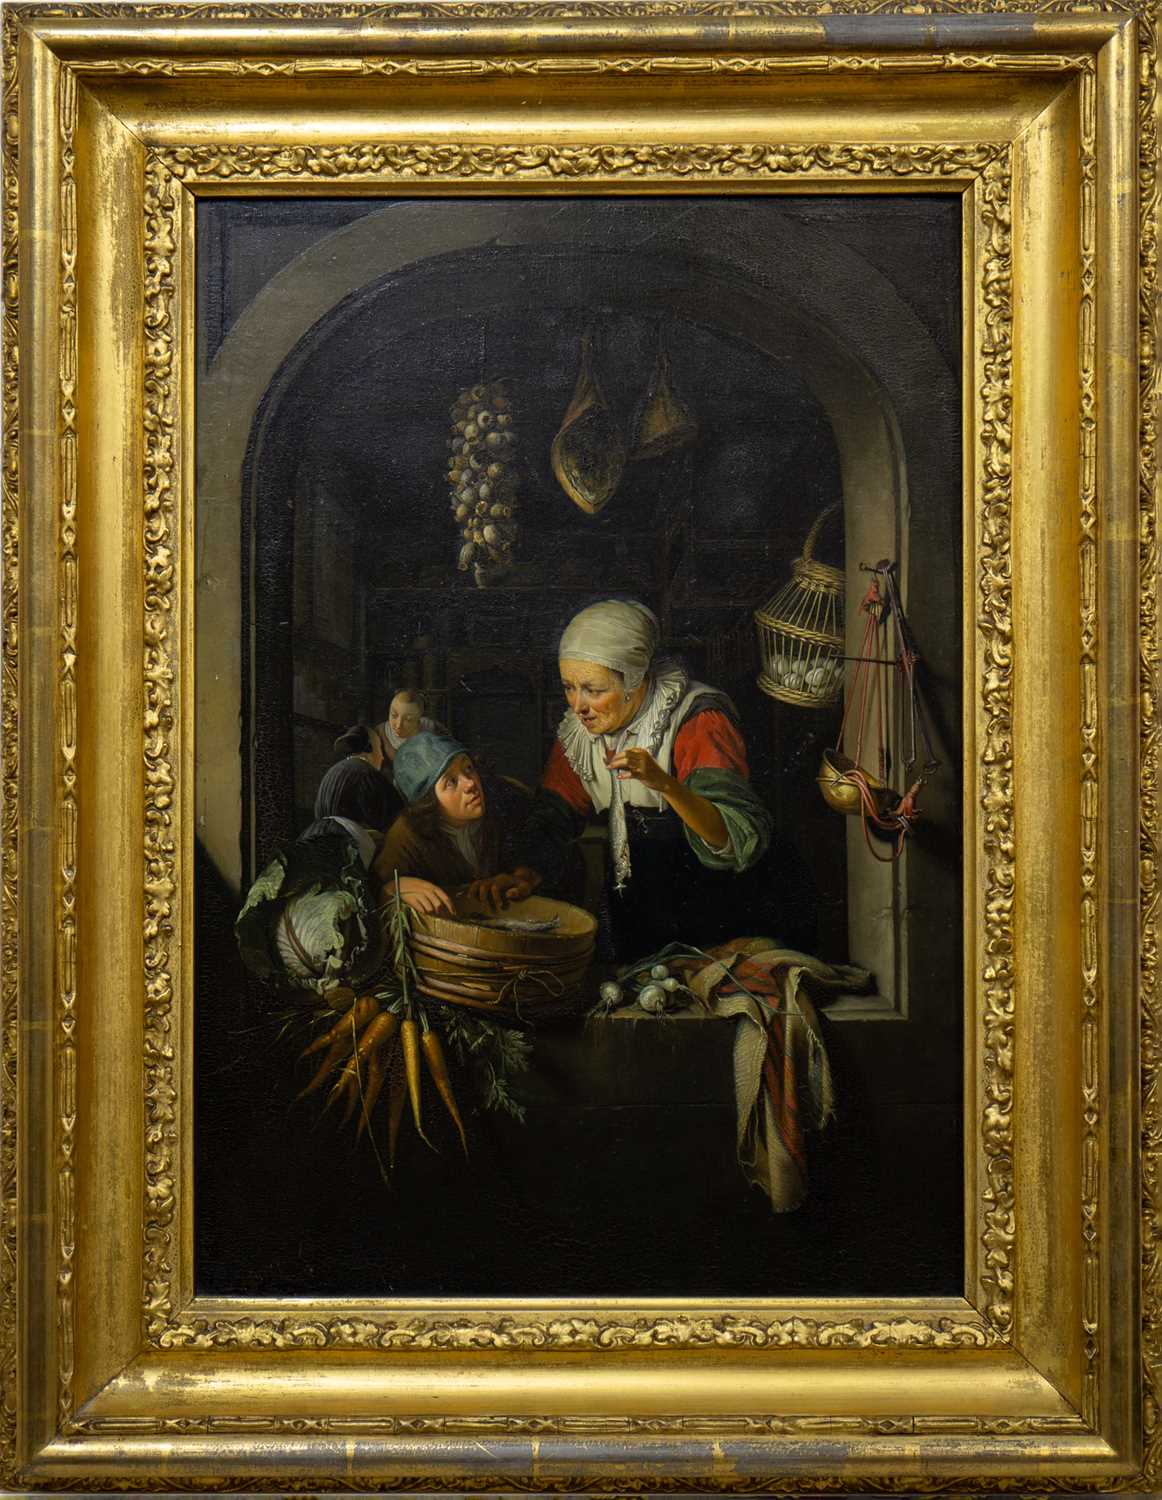 THE HERRING SELLER & THE BOY, AN OIL AFTER GERRIT DOU